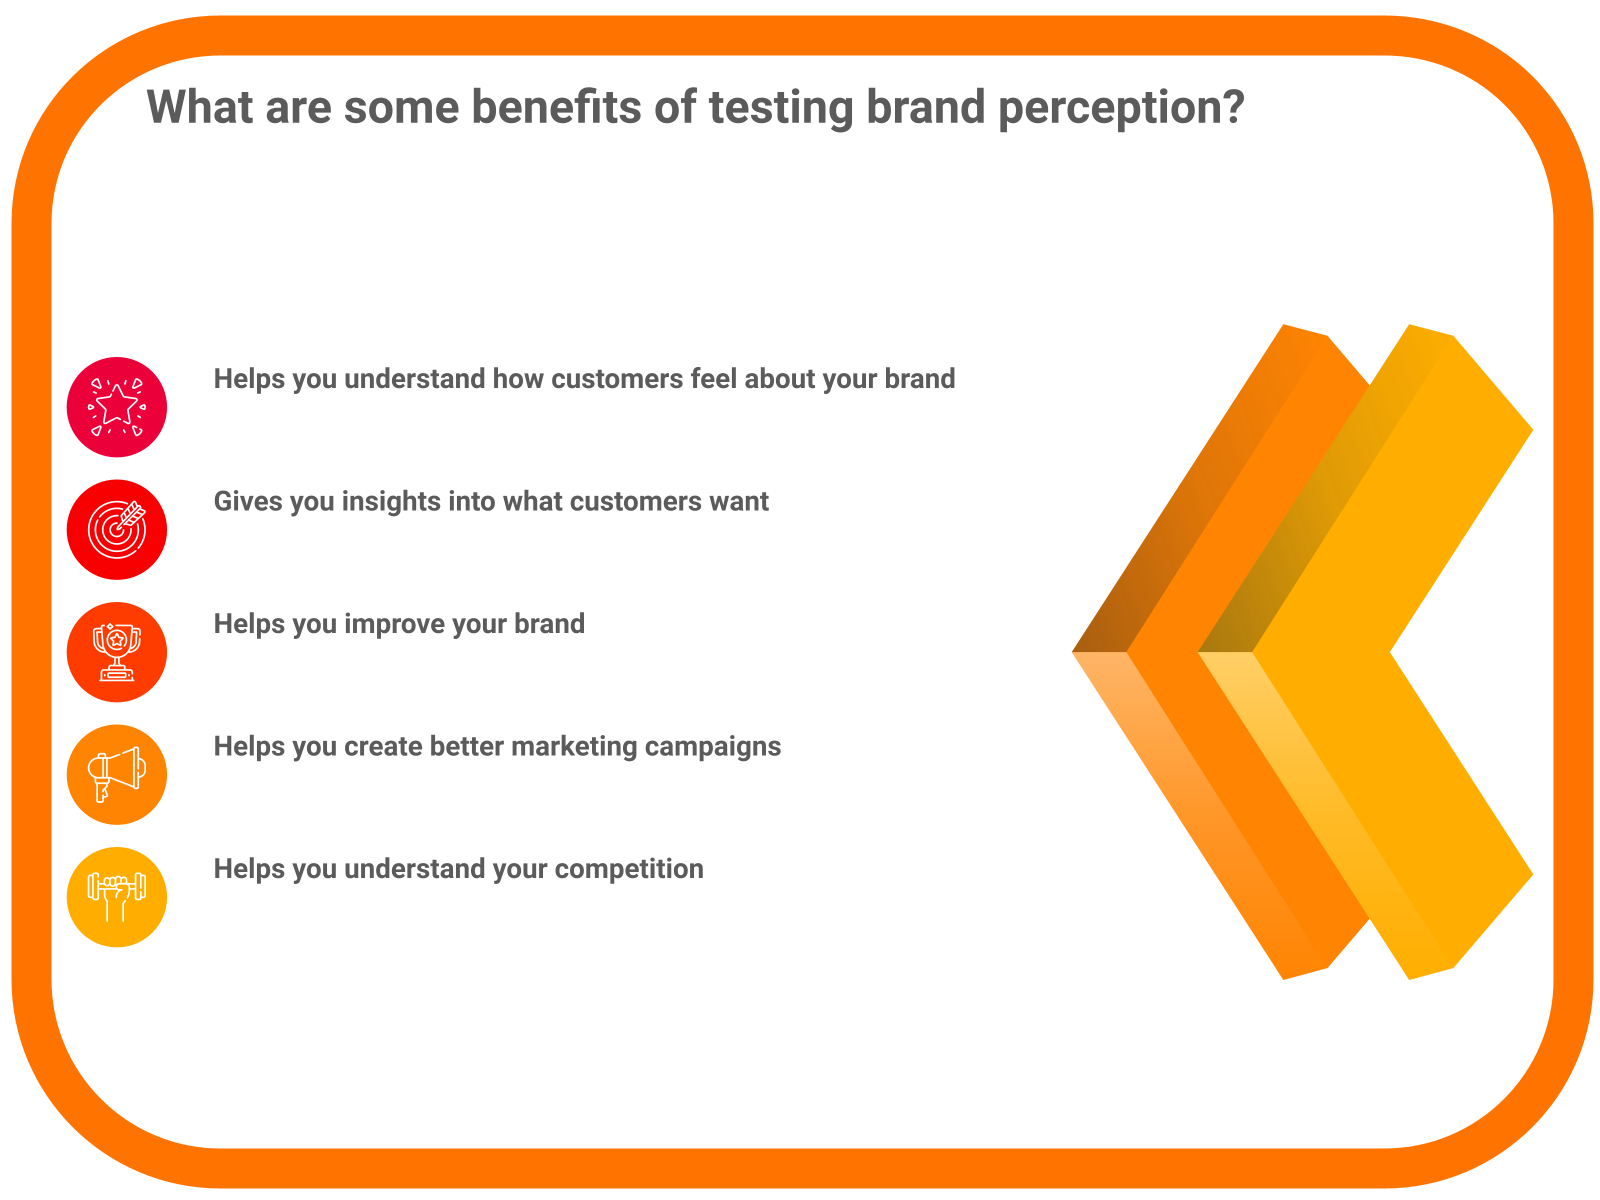 What are some benefits of testing brand perception?